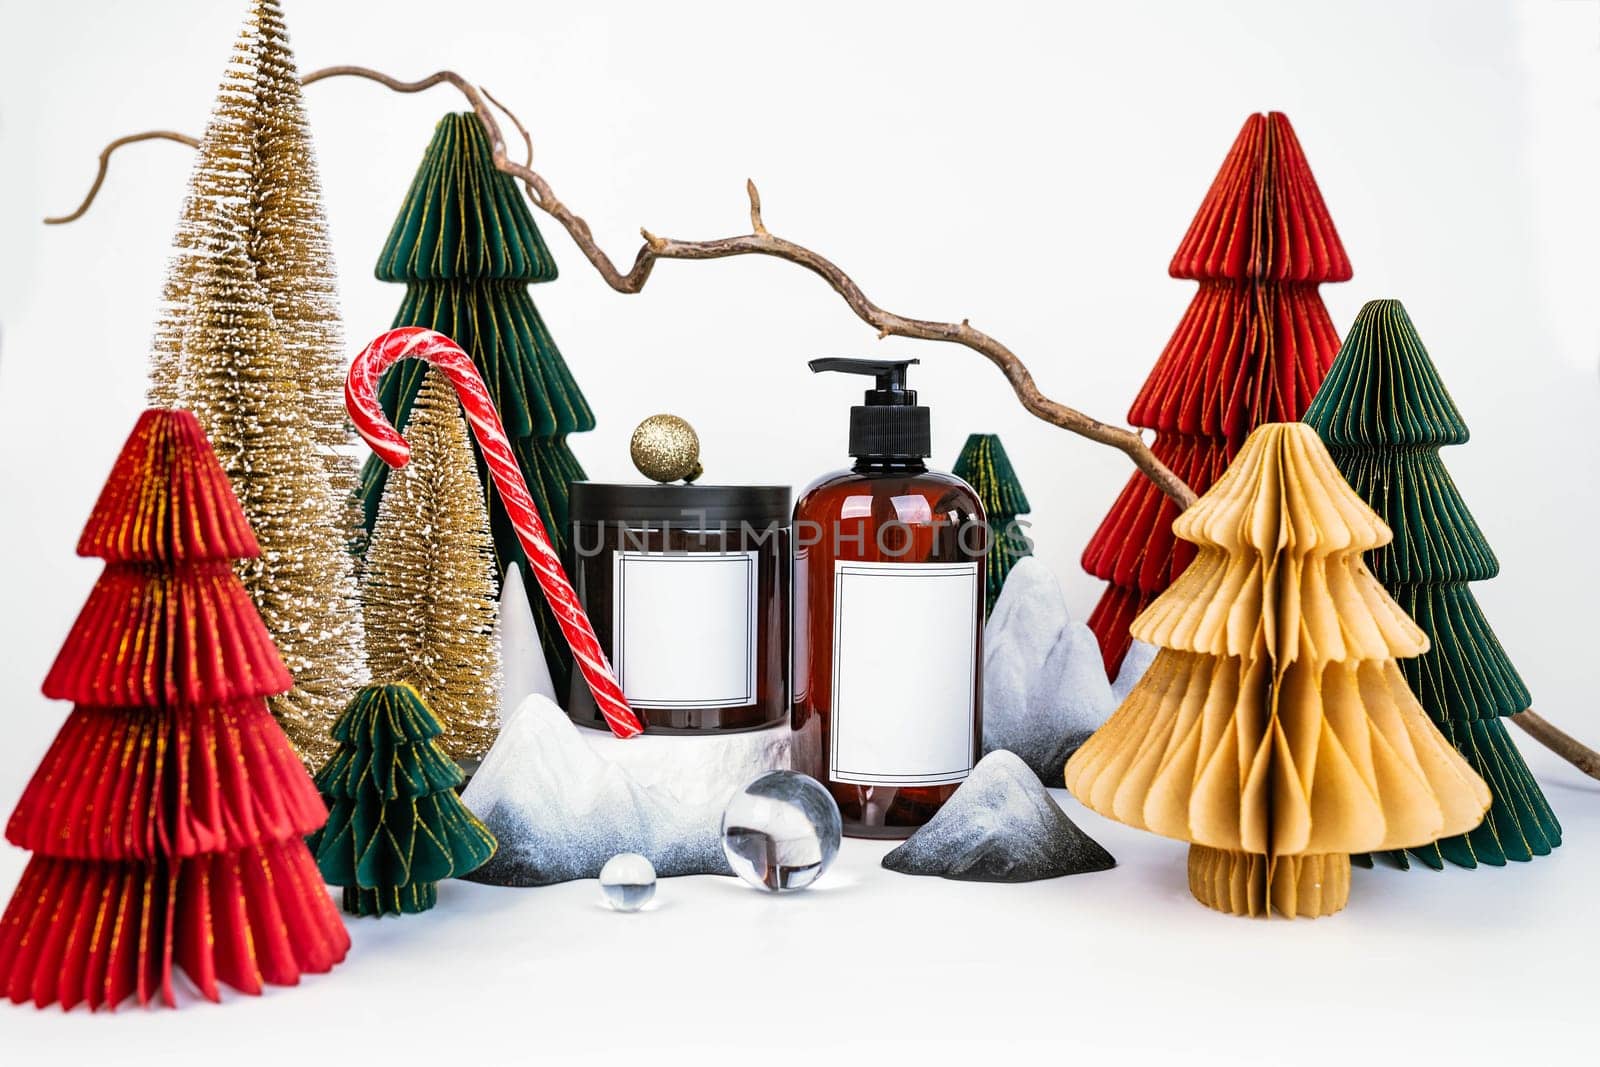 dark jar with lid and dispenser on the background of Christmas decorations, side view by tewolf